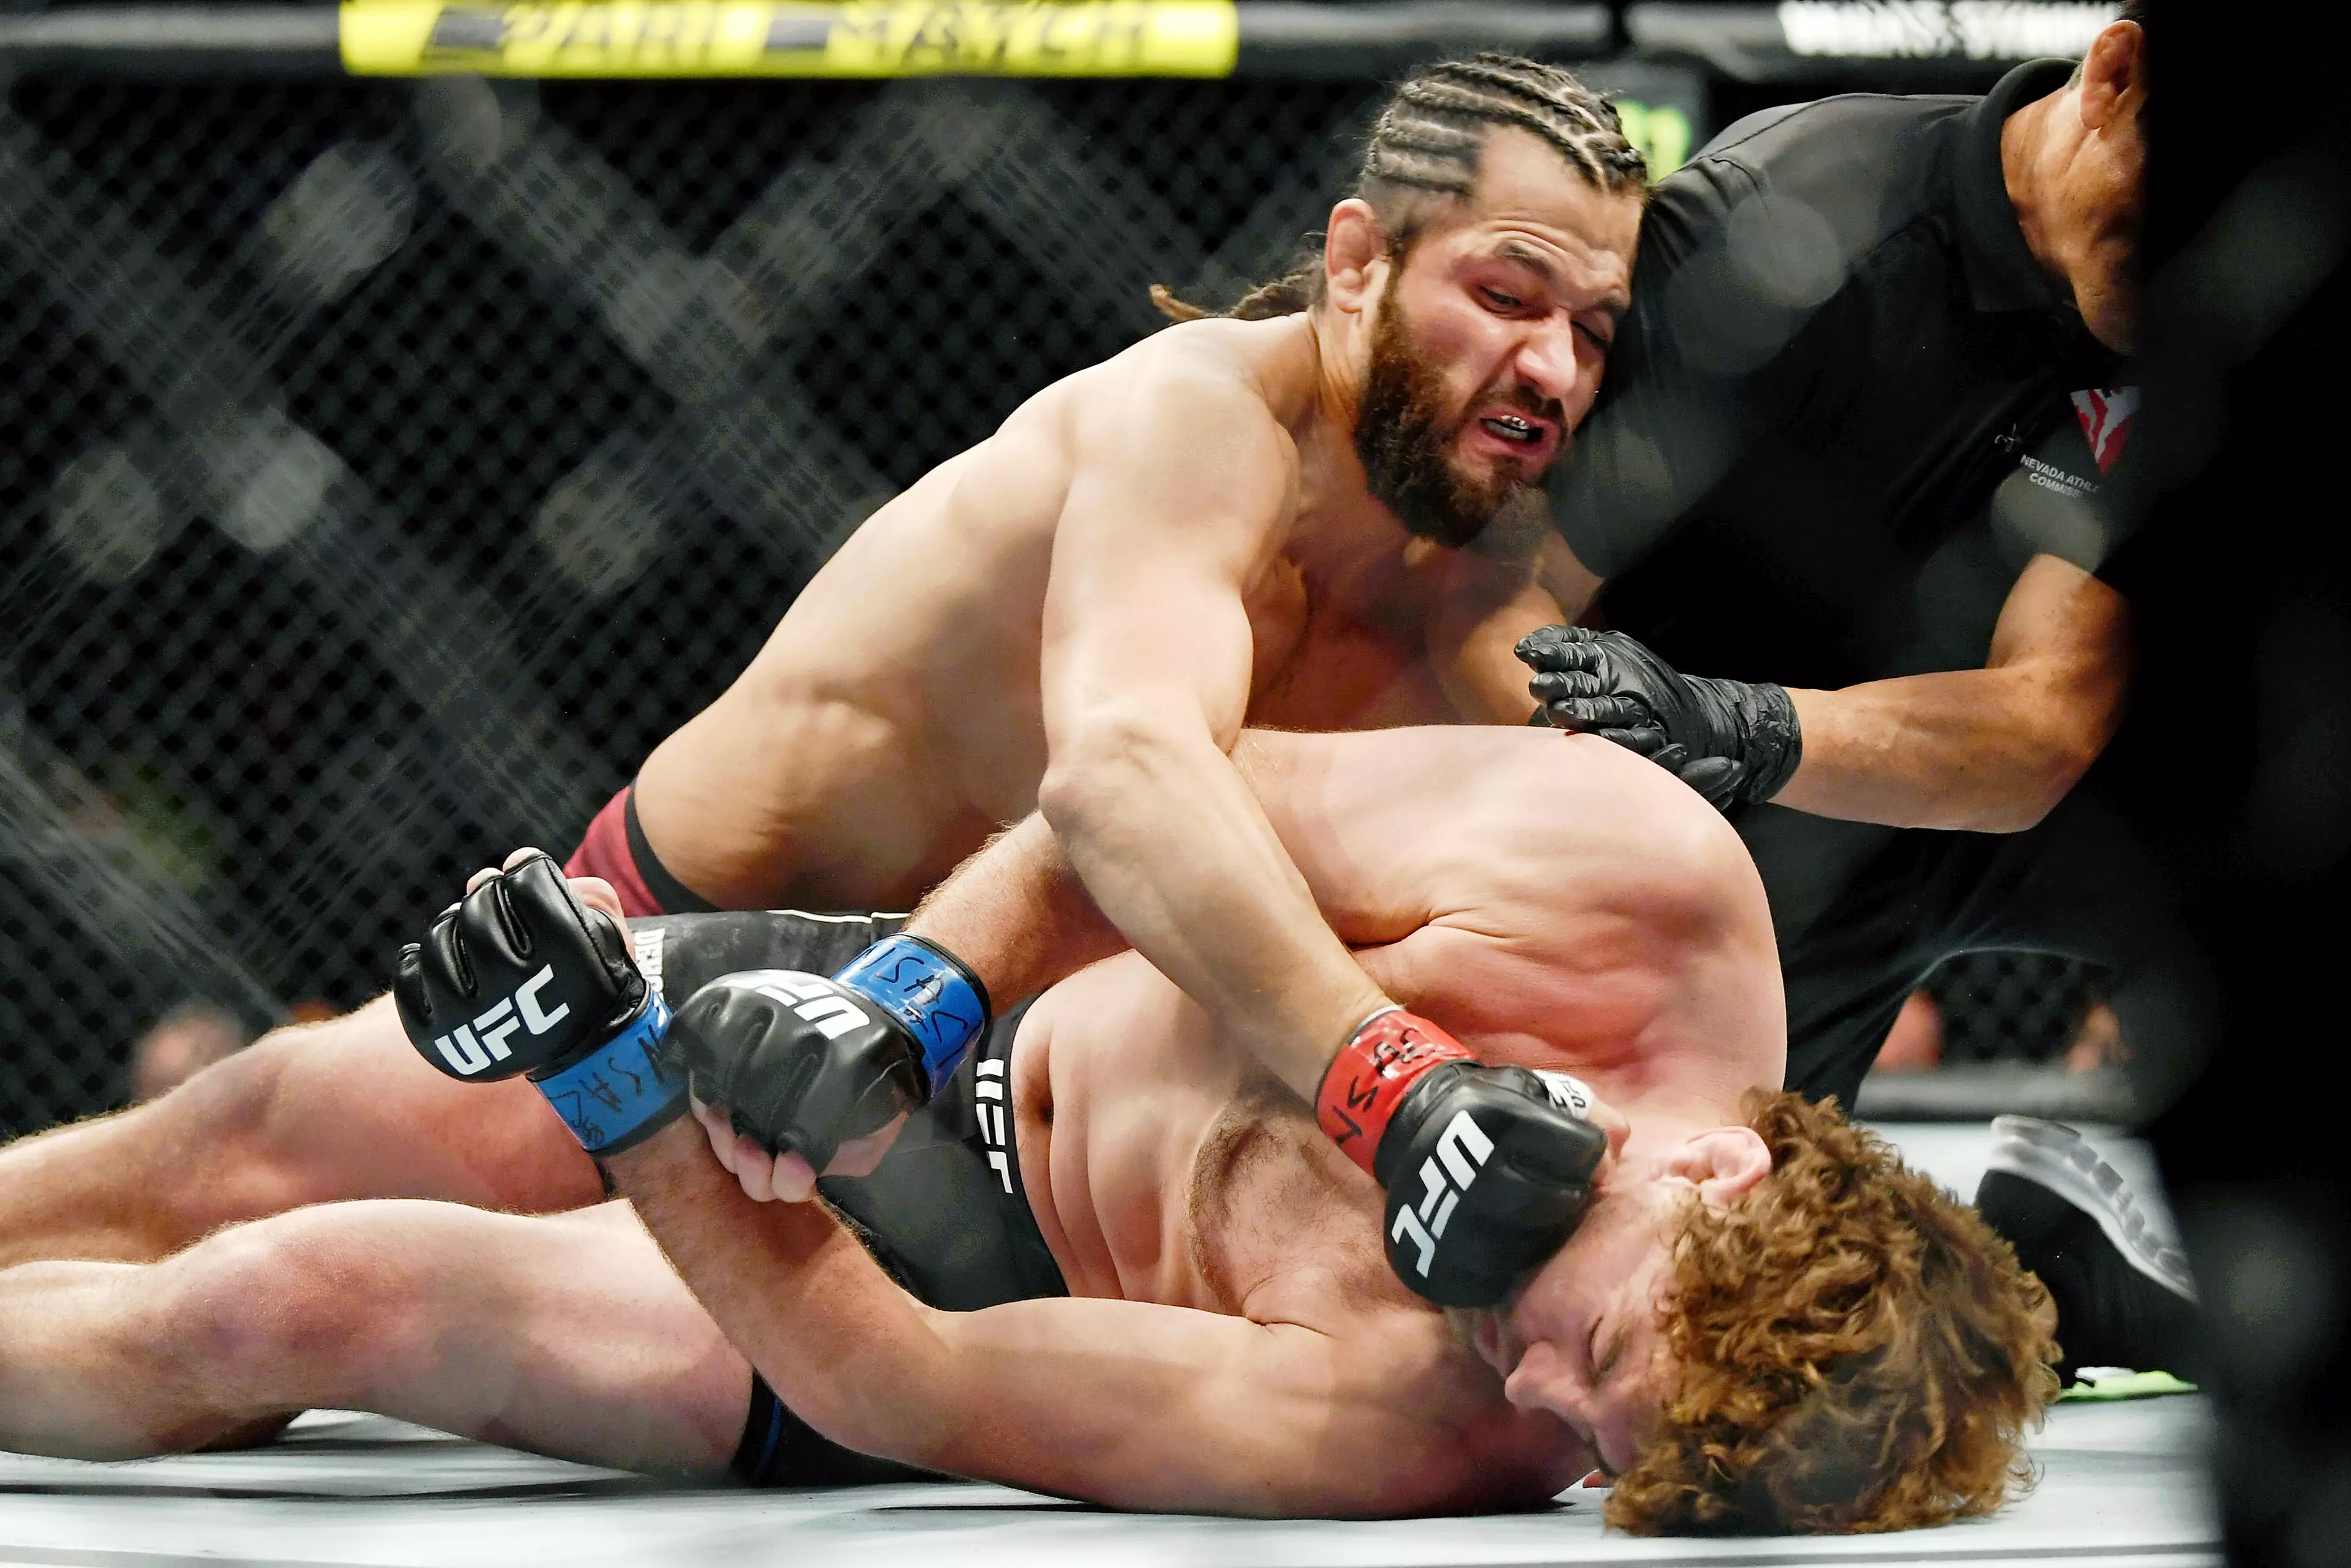 Askren's most famous defeat was his loss in seconds to Jorge Masvidal. Image: PA Images